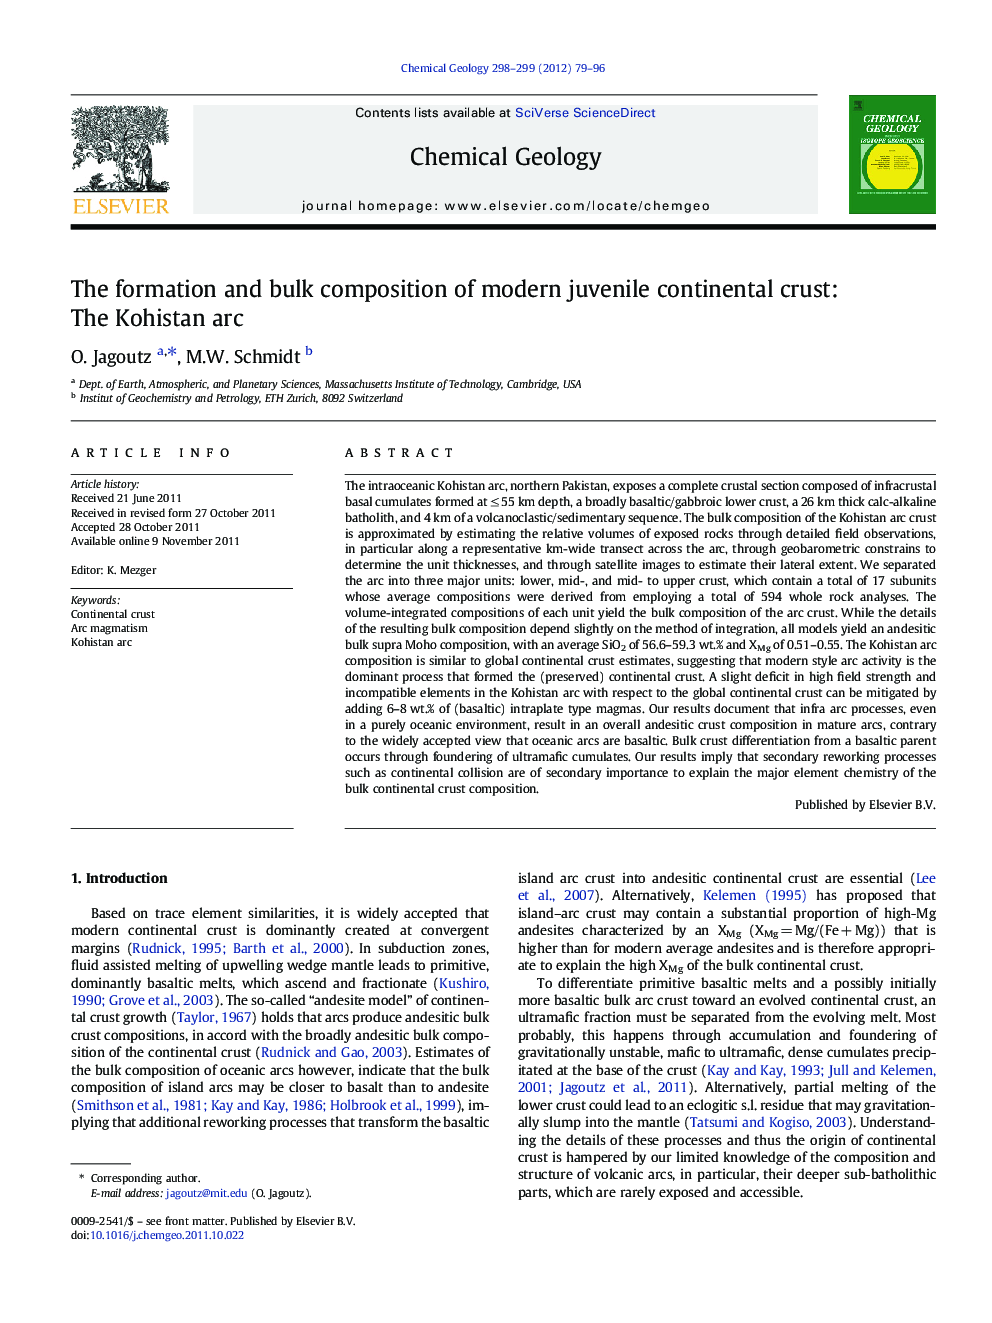 The formation and bulk composition of modern juvenile continental crust: The Kohistan arc